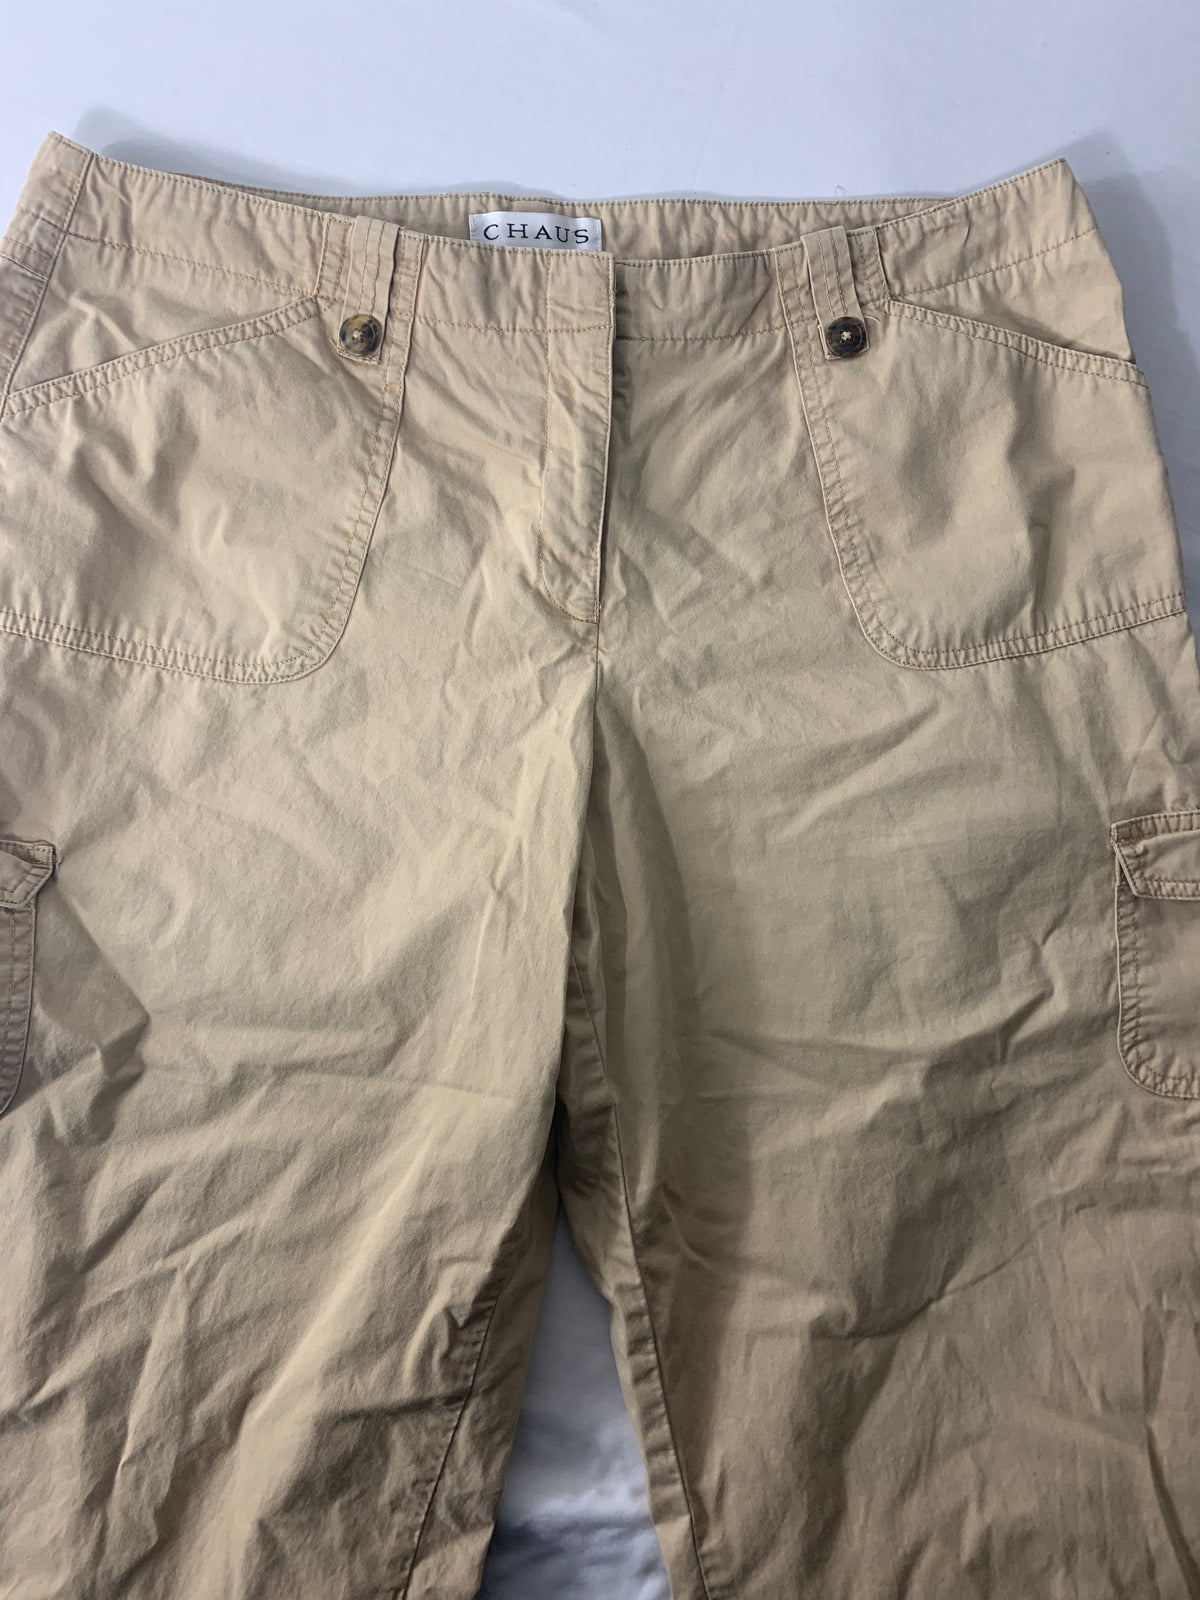 Women's Capris by Chaus size 14 Beige in color RN 51323